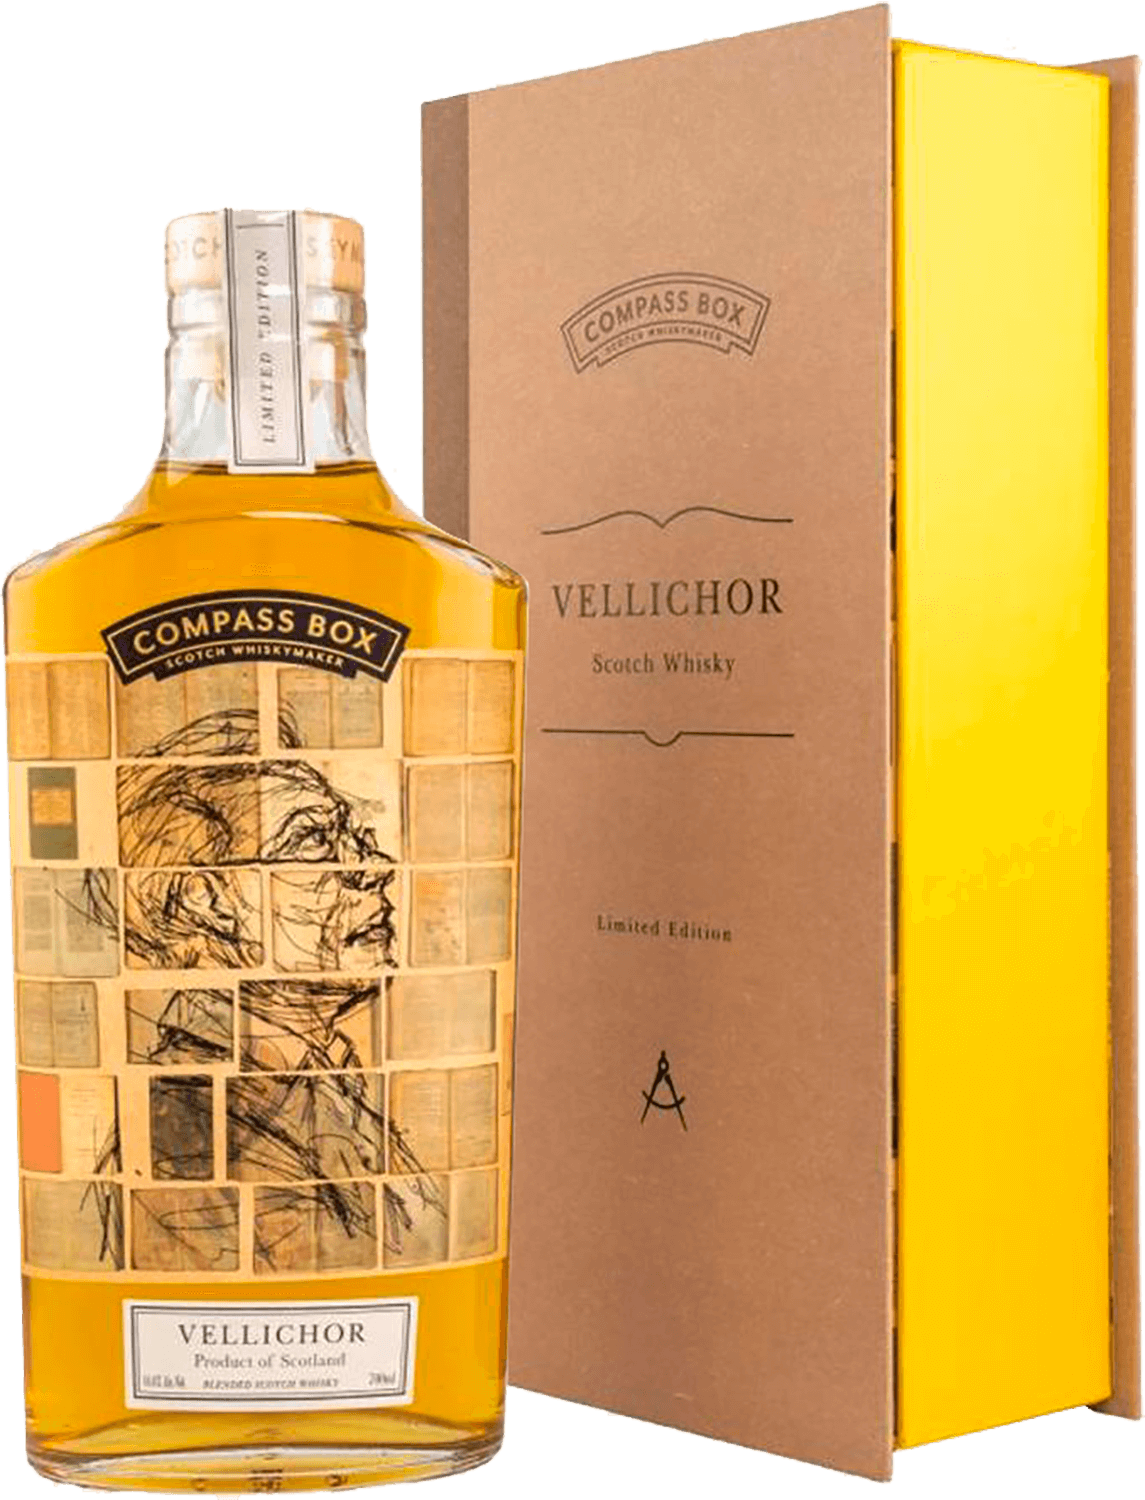 Compass Box Vellichor Blended Scotch Whisky (gift box) grant s ale cask finish blended scotch whisky gift box